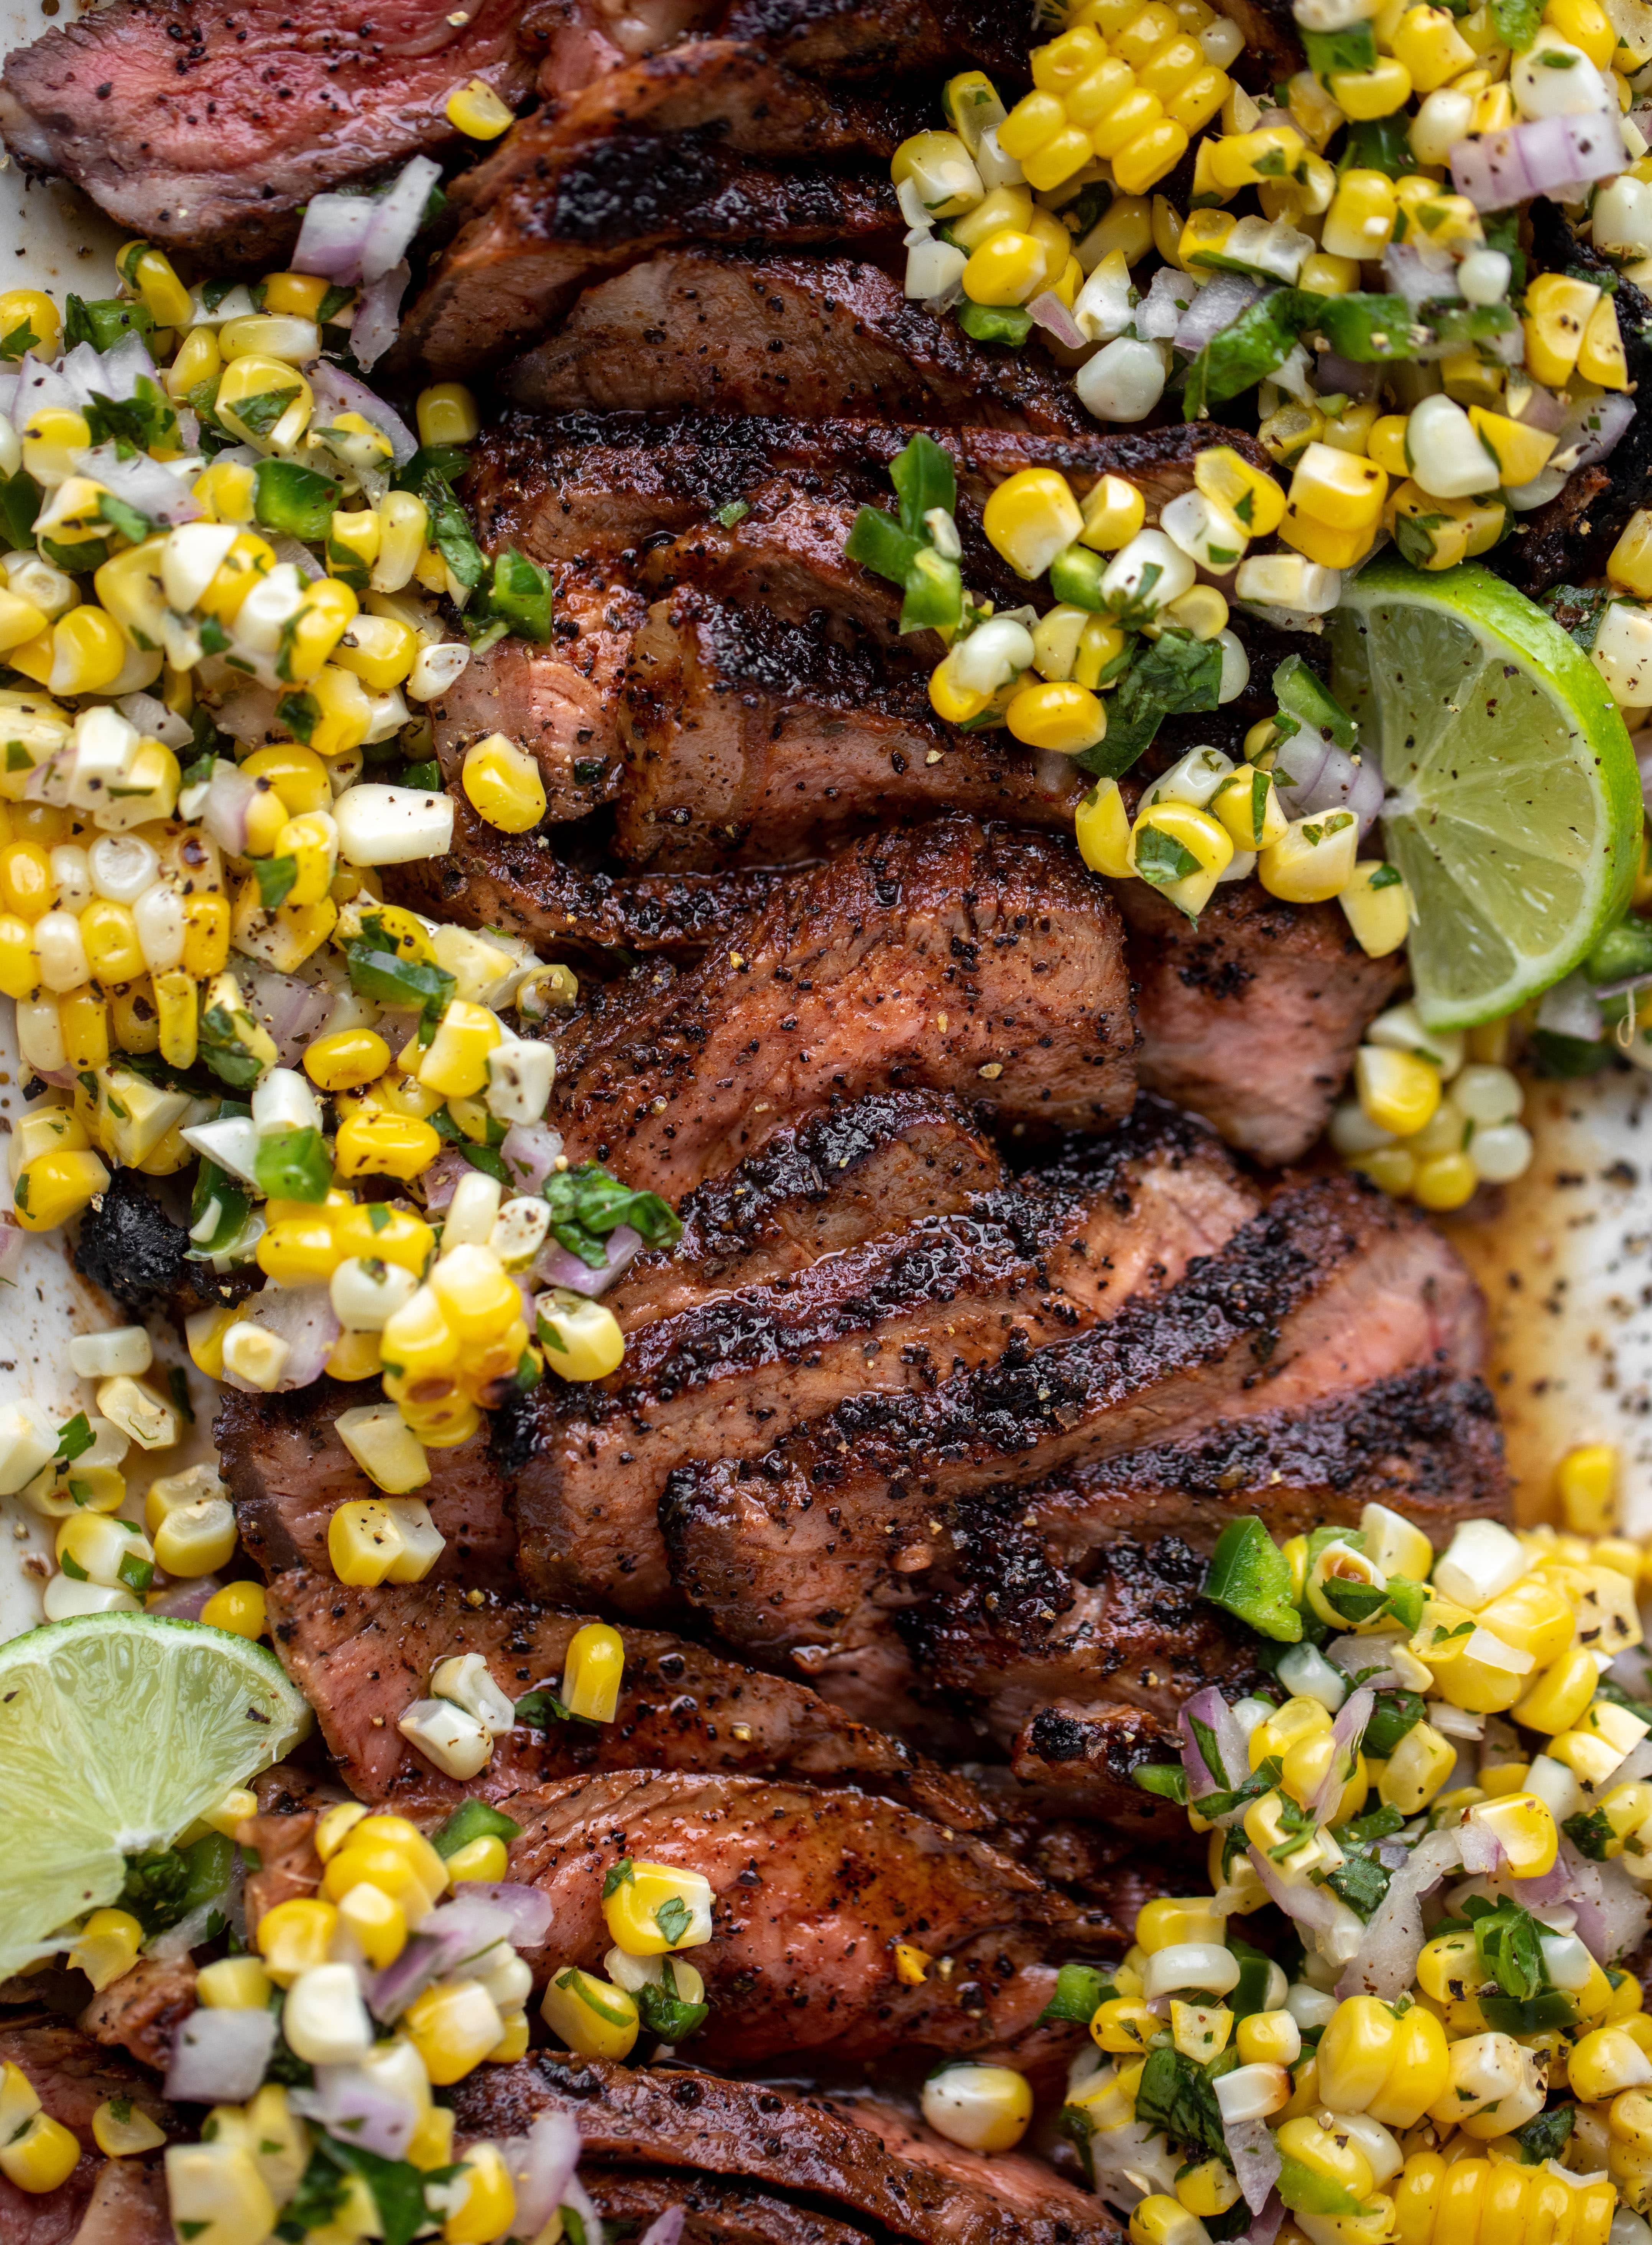 This coffee crusted steak is incredibly flavorful! Topped with a fresh and bright herbed corn salsa, it's the perfect meal to kick off summer.